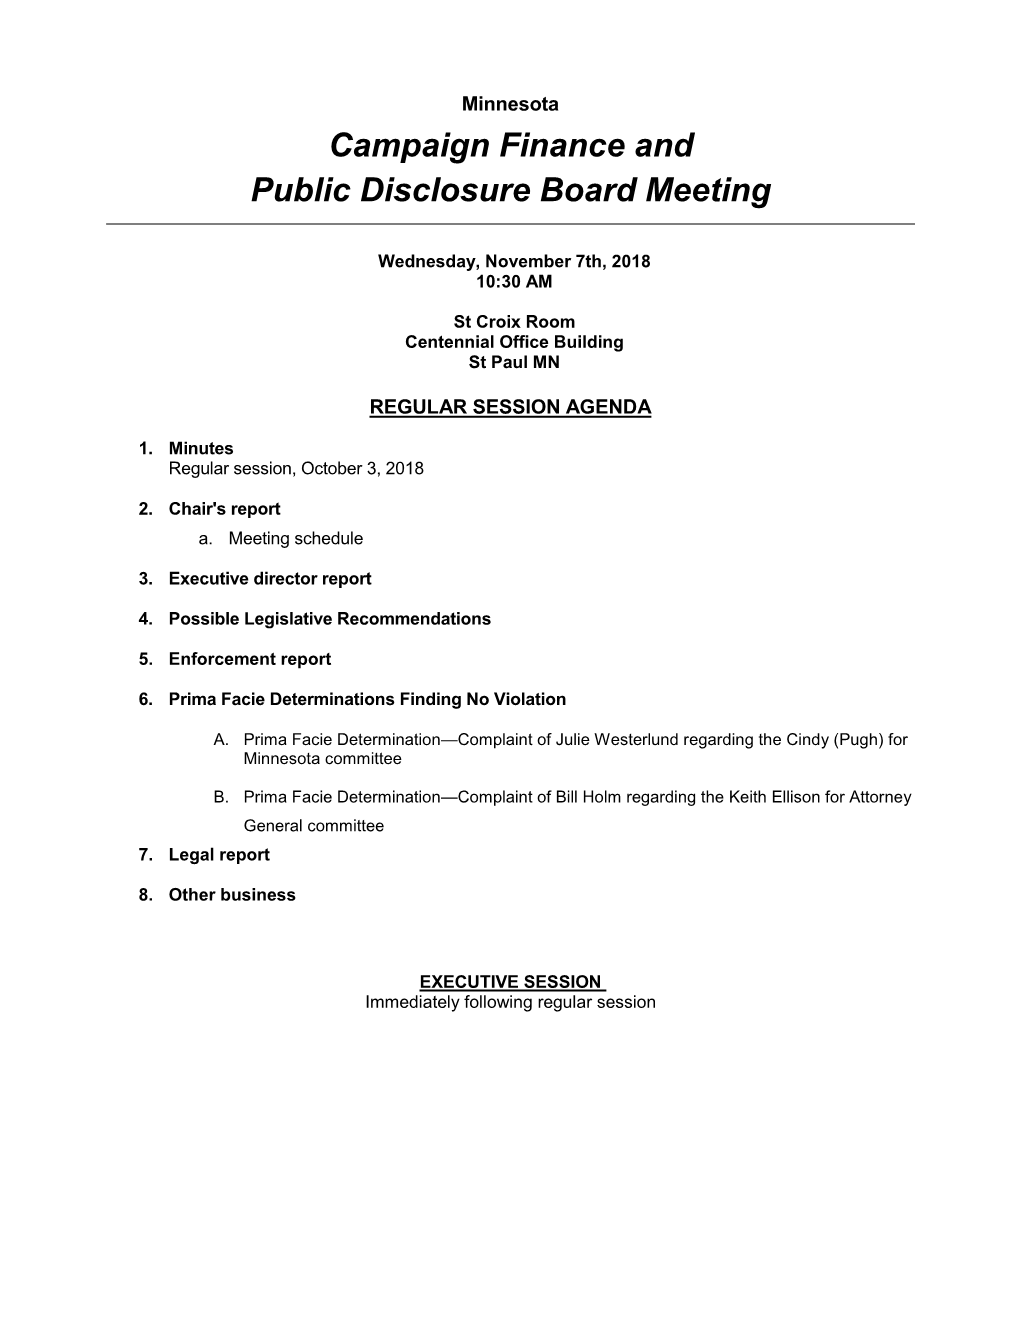 Campaign Finance and Public Disclosure Board Meeting